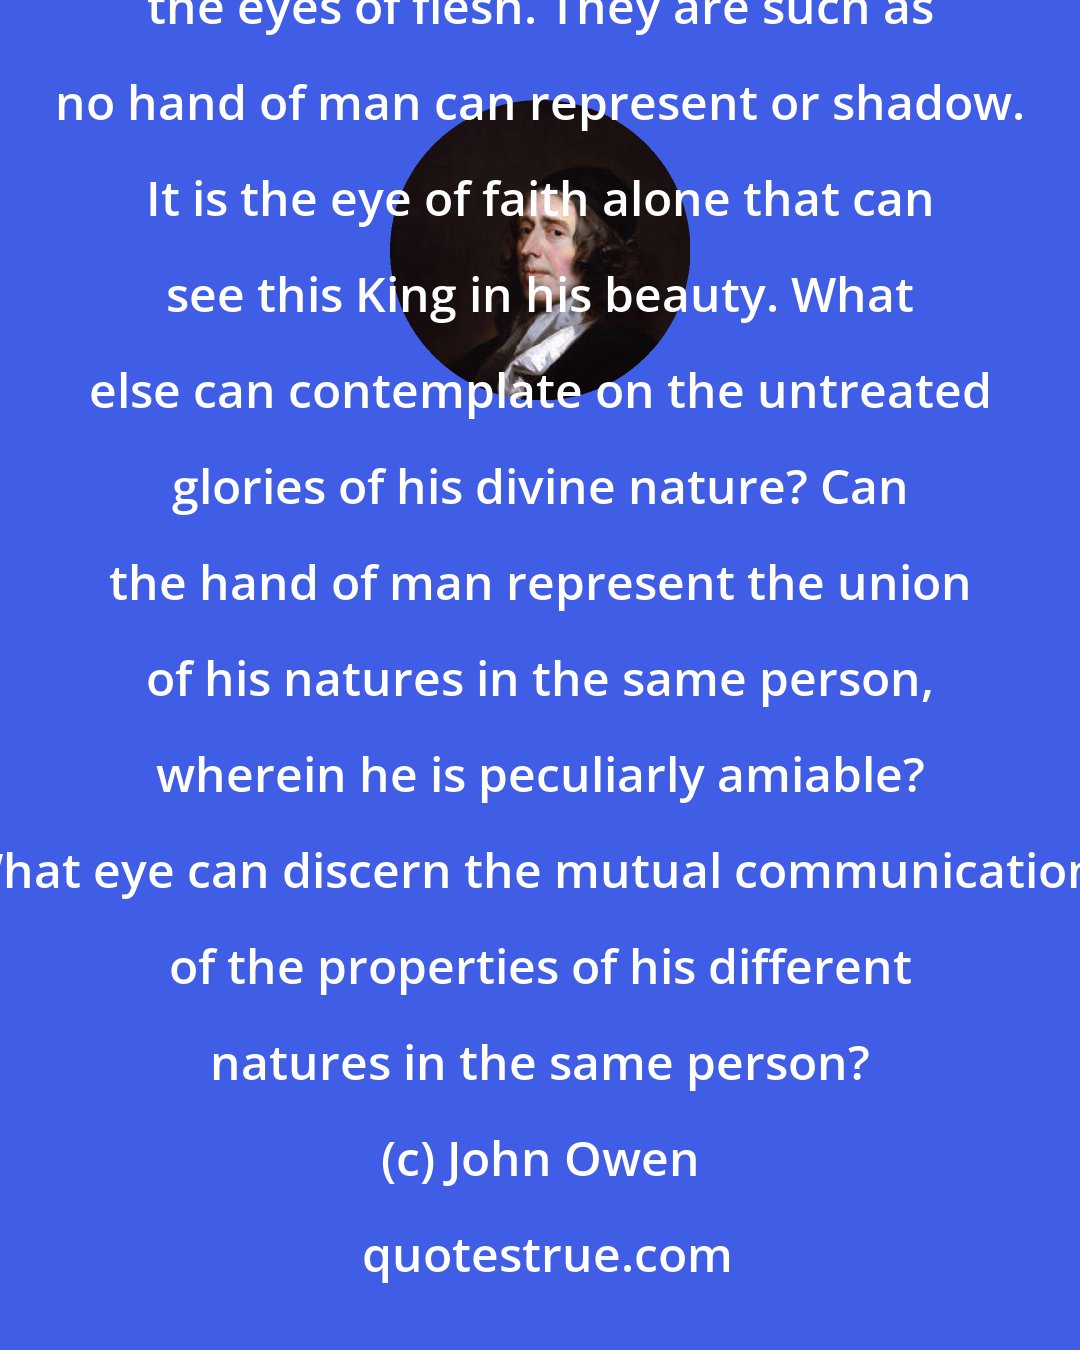 John Owen: The beauty of the person of Christ, as represented in the Scripture, consists in things invisible unto the eyes of flesh. They are such as no hand of man can represent or shadow. It is the eye of faith alone that can see this King in his beauty. What else can contemplate on the untreated glories of his divine nature? Can the hand of man represent the union of his natures in the same person, wherein he is peculiarly amiable? What eye can discern the mutual communications of the properties of his different natures in the same person?